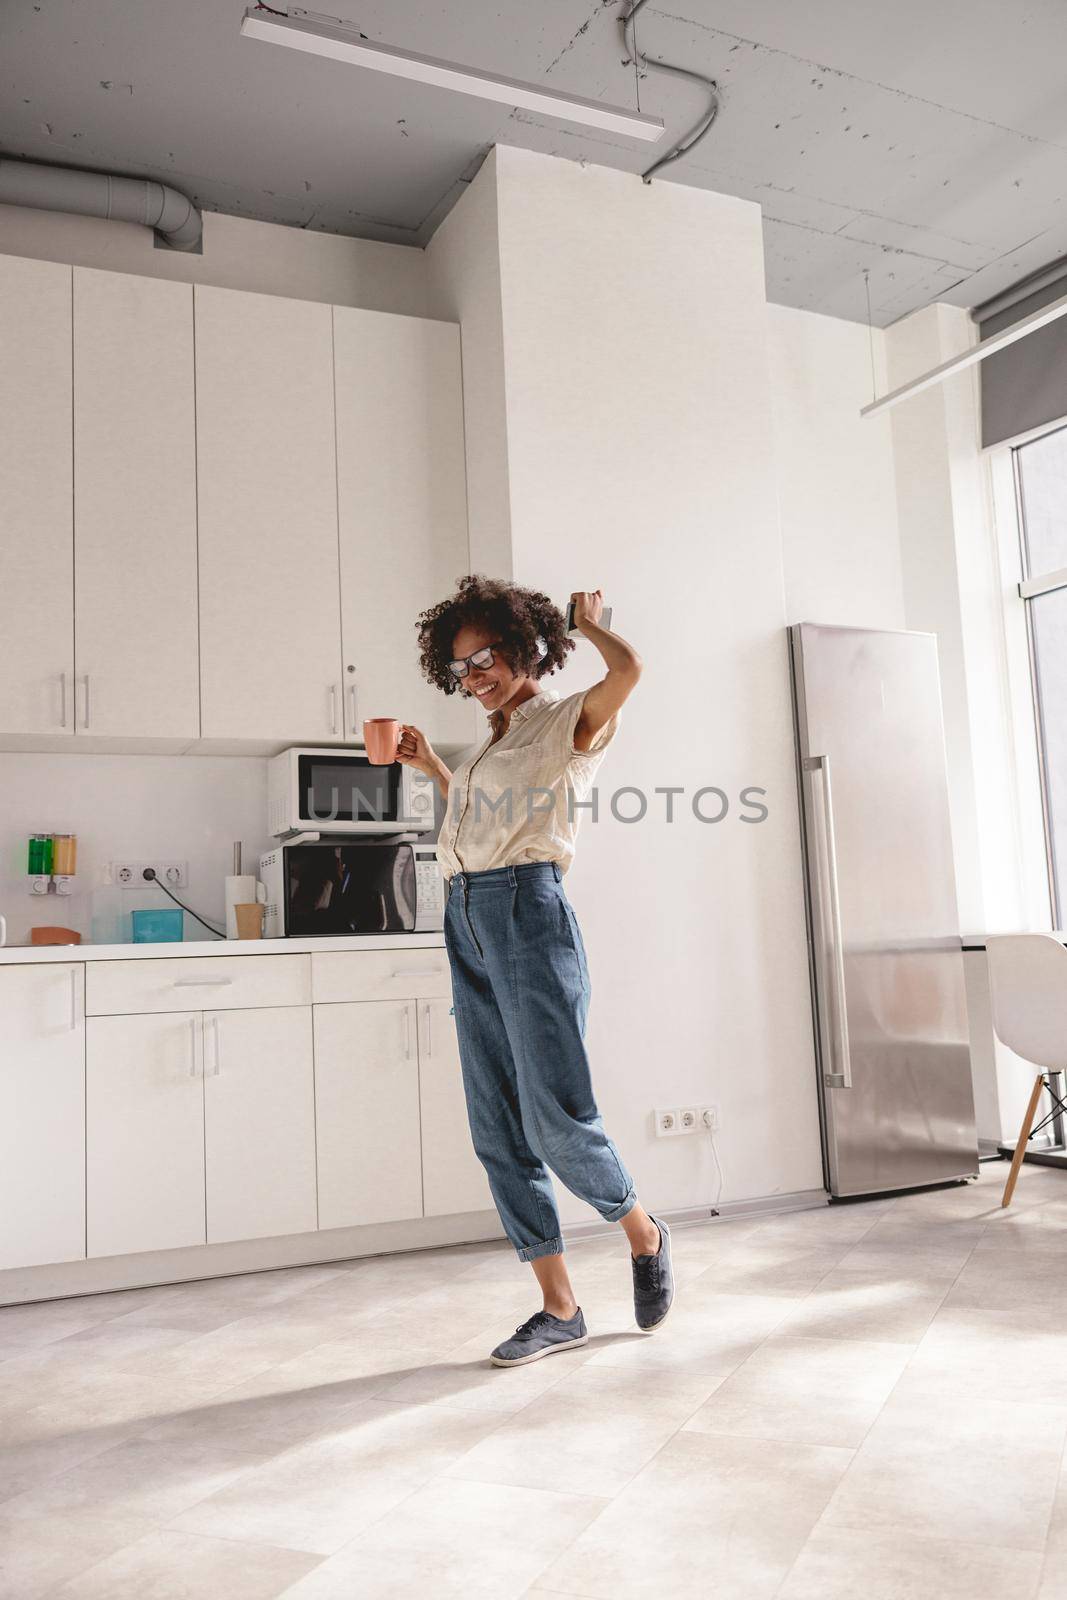 Full-length photo of African American woman holding cup of hot drink while using headphones and dancing on the kitchen